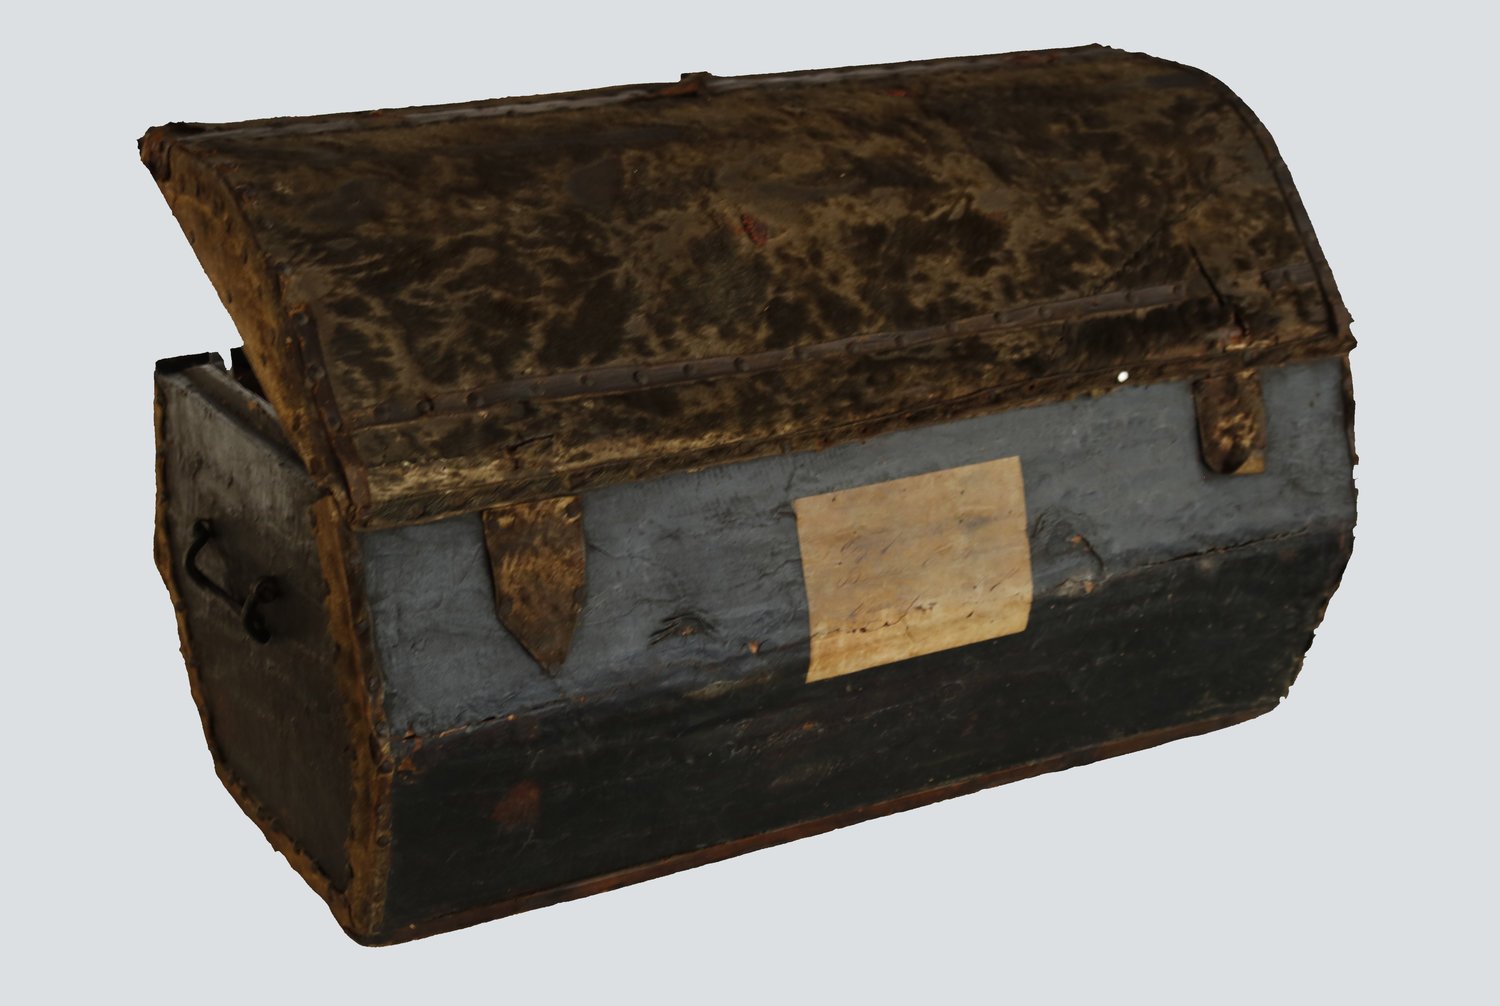     “the piggy bank”    Maria Germain and Simon de Brienne died in 1703 and 1707 respectively. Not having any children, they bequeathed their belongings to the orphanage in Delft. Among them was a trunk.  The Briennes’ trunk is a unique artefact. It 